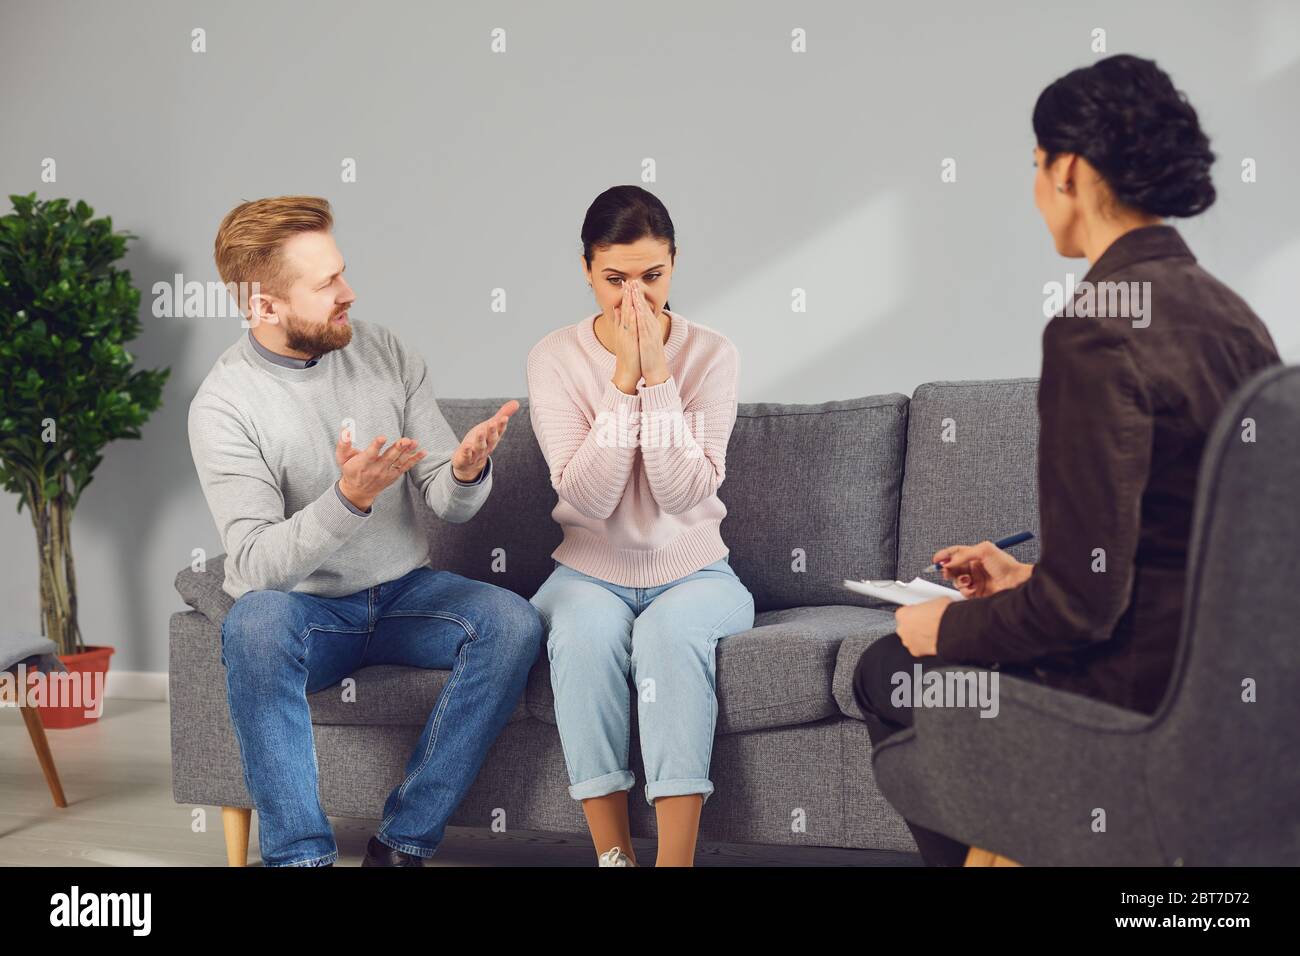 Psychologist at a psychotherapy session with a couple in the room. Man and woman visit a psychologist in an office. Stock Photo